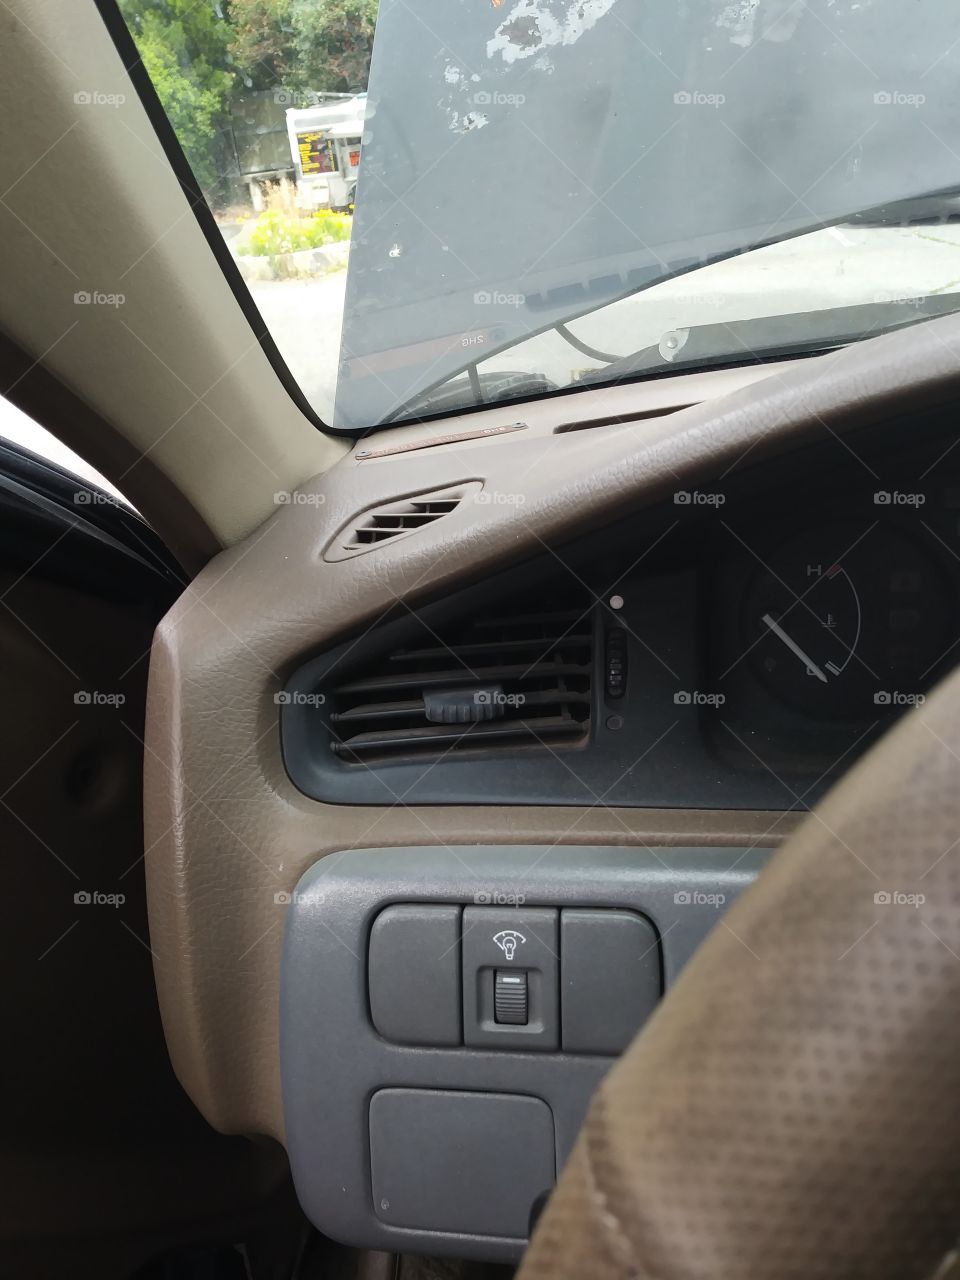 driver side of auto interior with hood up outside